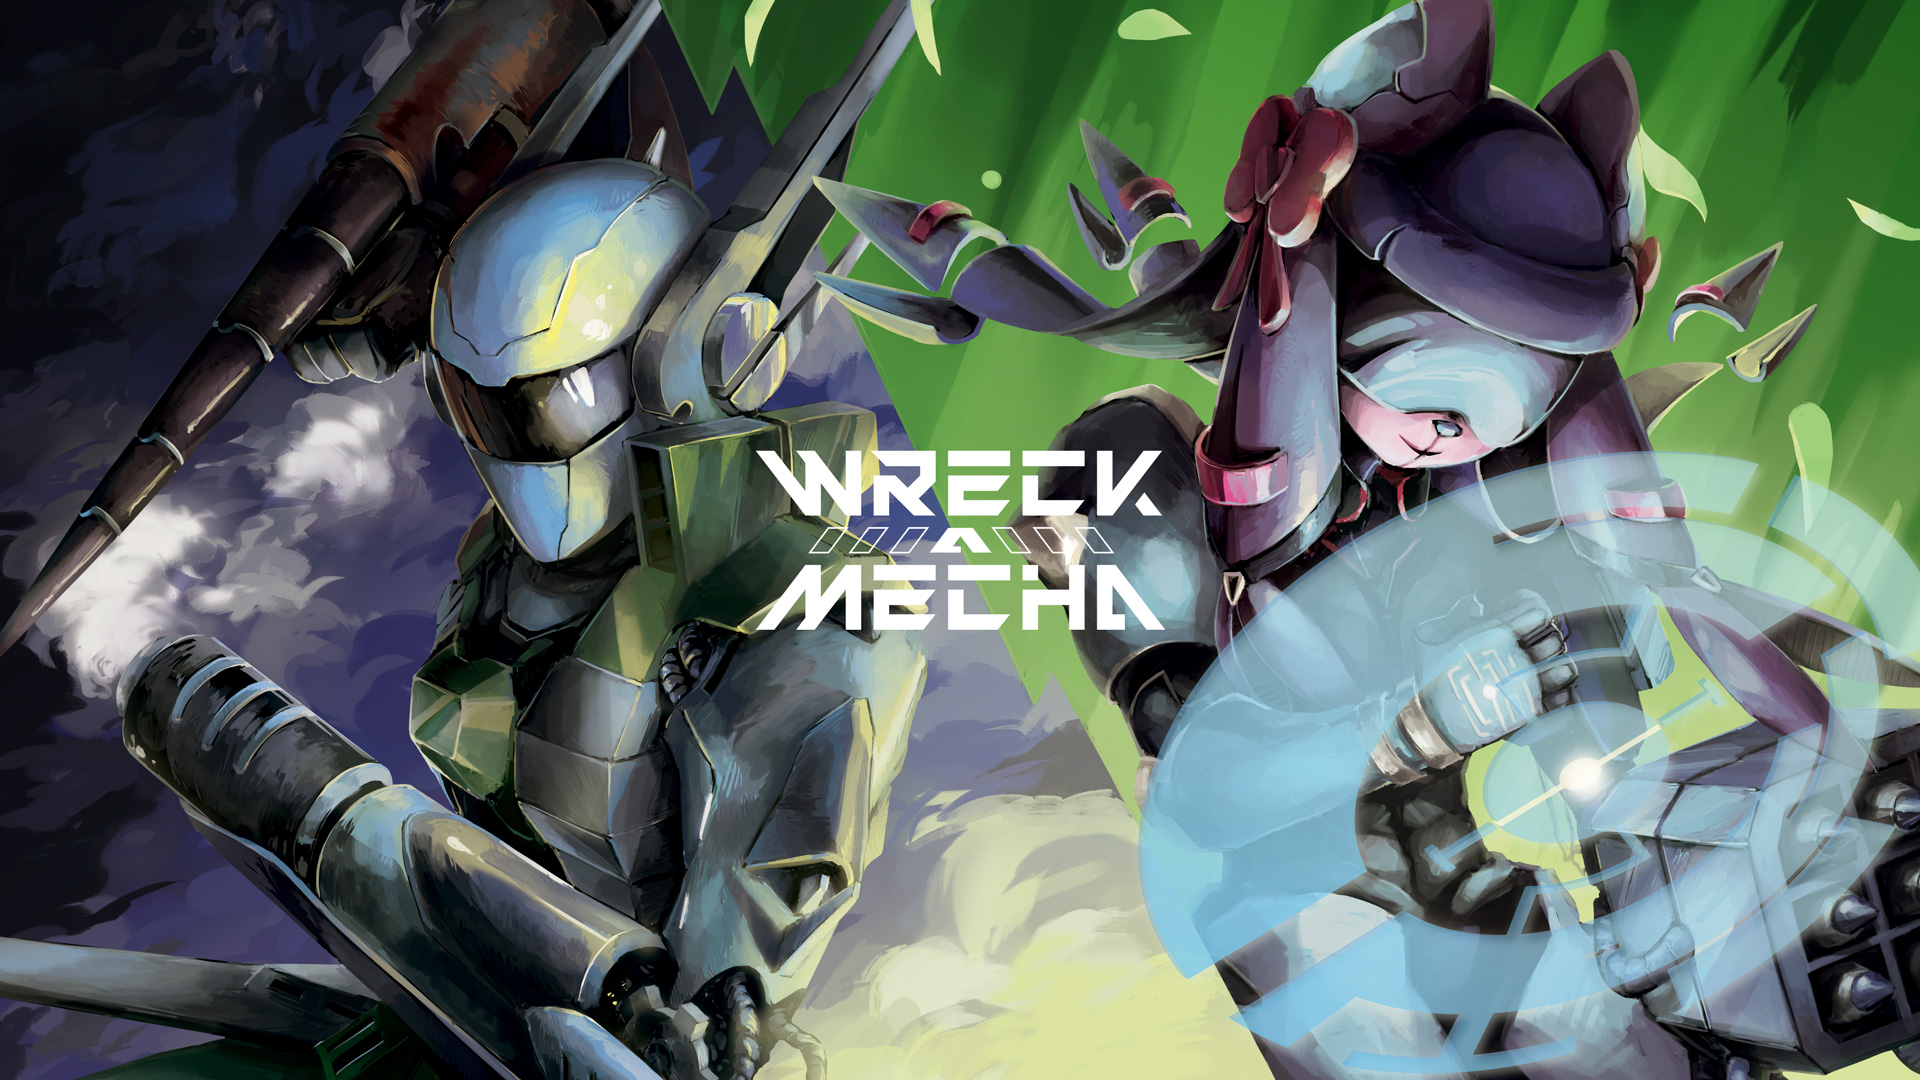 Wreck-A-Mecha Print and Play (PnP)